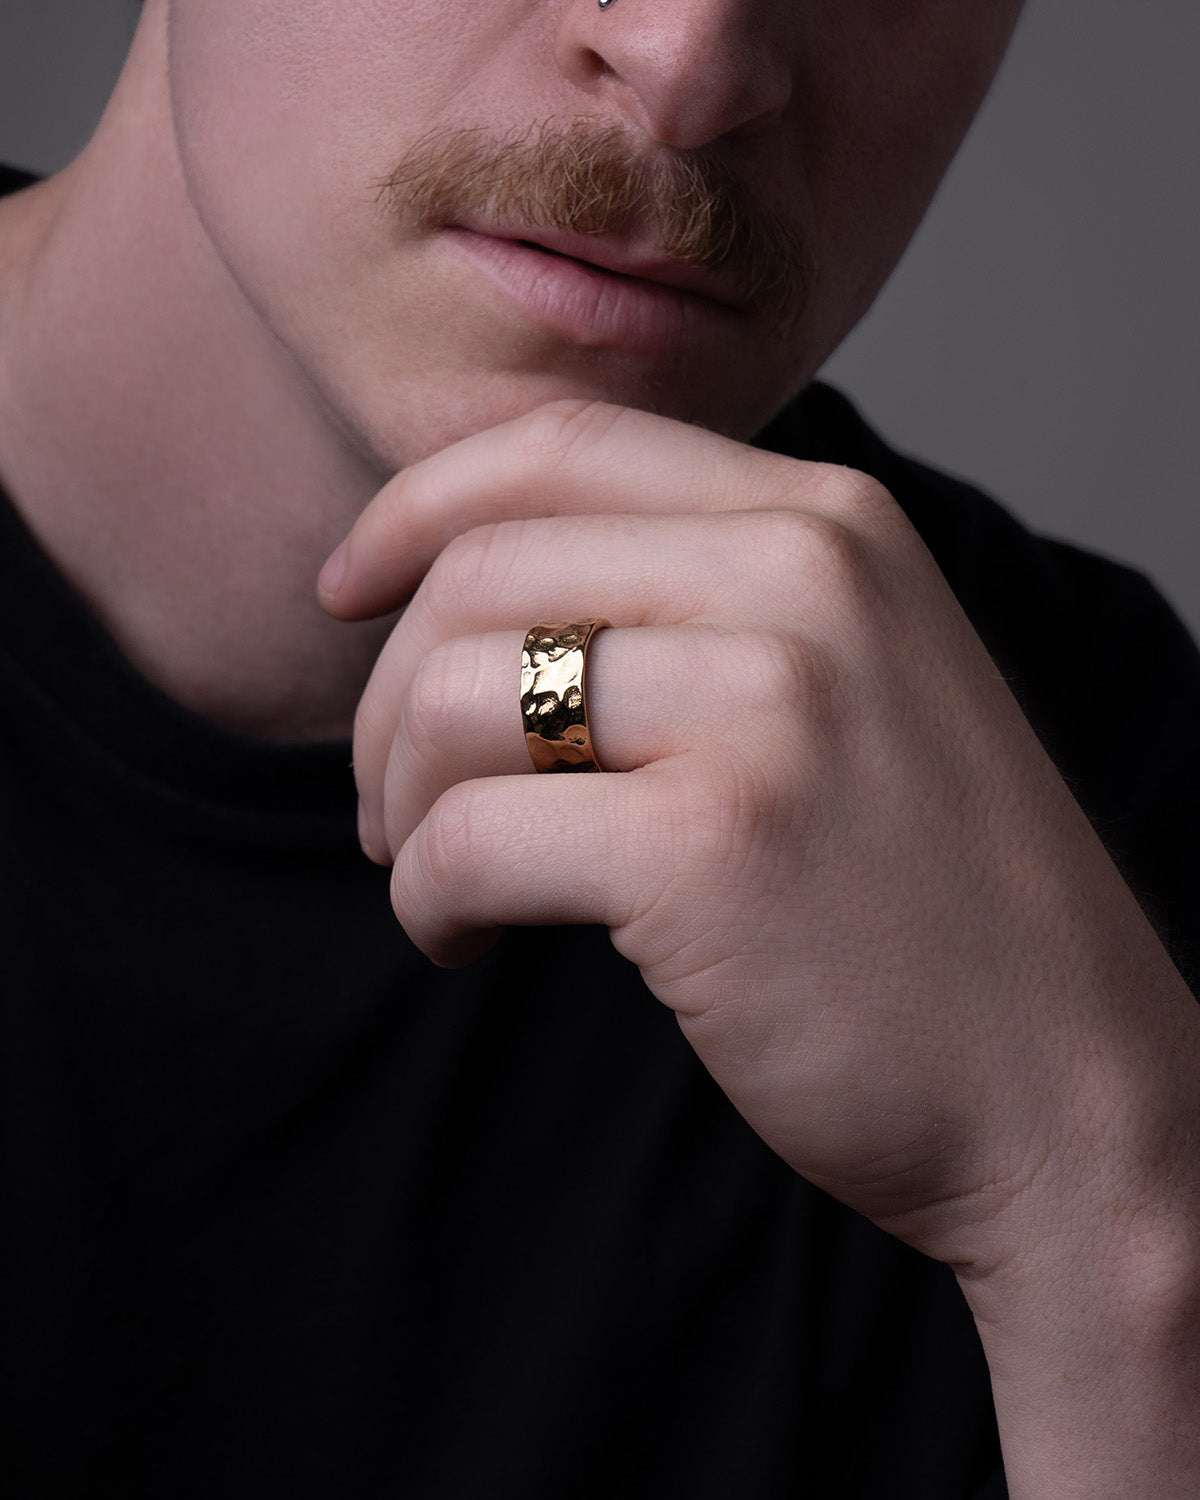 LUNE ring, designed in Montreal and made of waterproof and hypoallergenic stainless steel in a 14k gold hue. Its unique design boasts delicate bumps, embodying a perfectly imperfect aesthetic inspired by the lunar landscape with its craters and golden reflections.